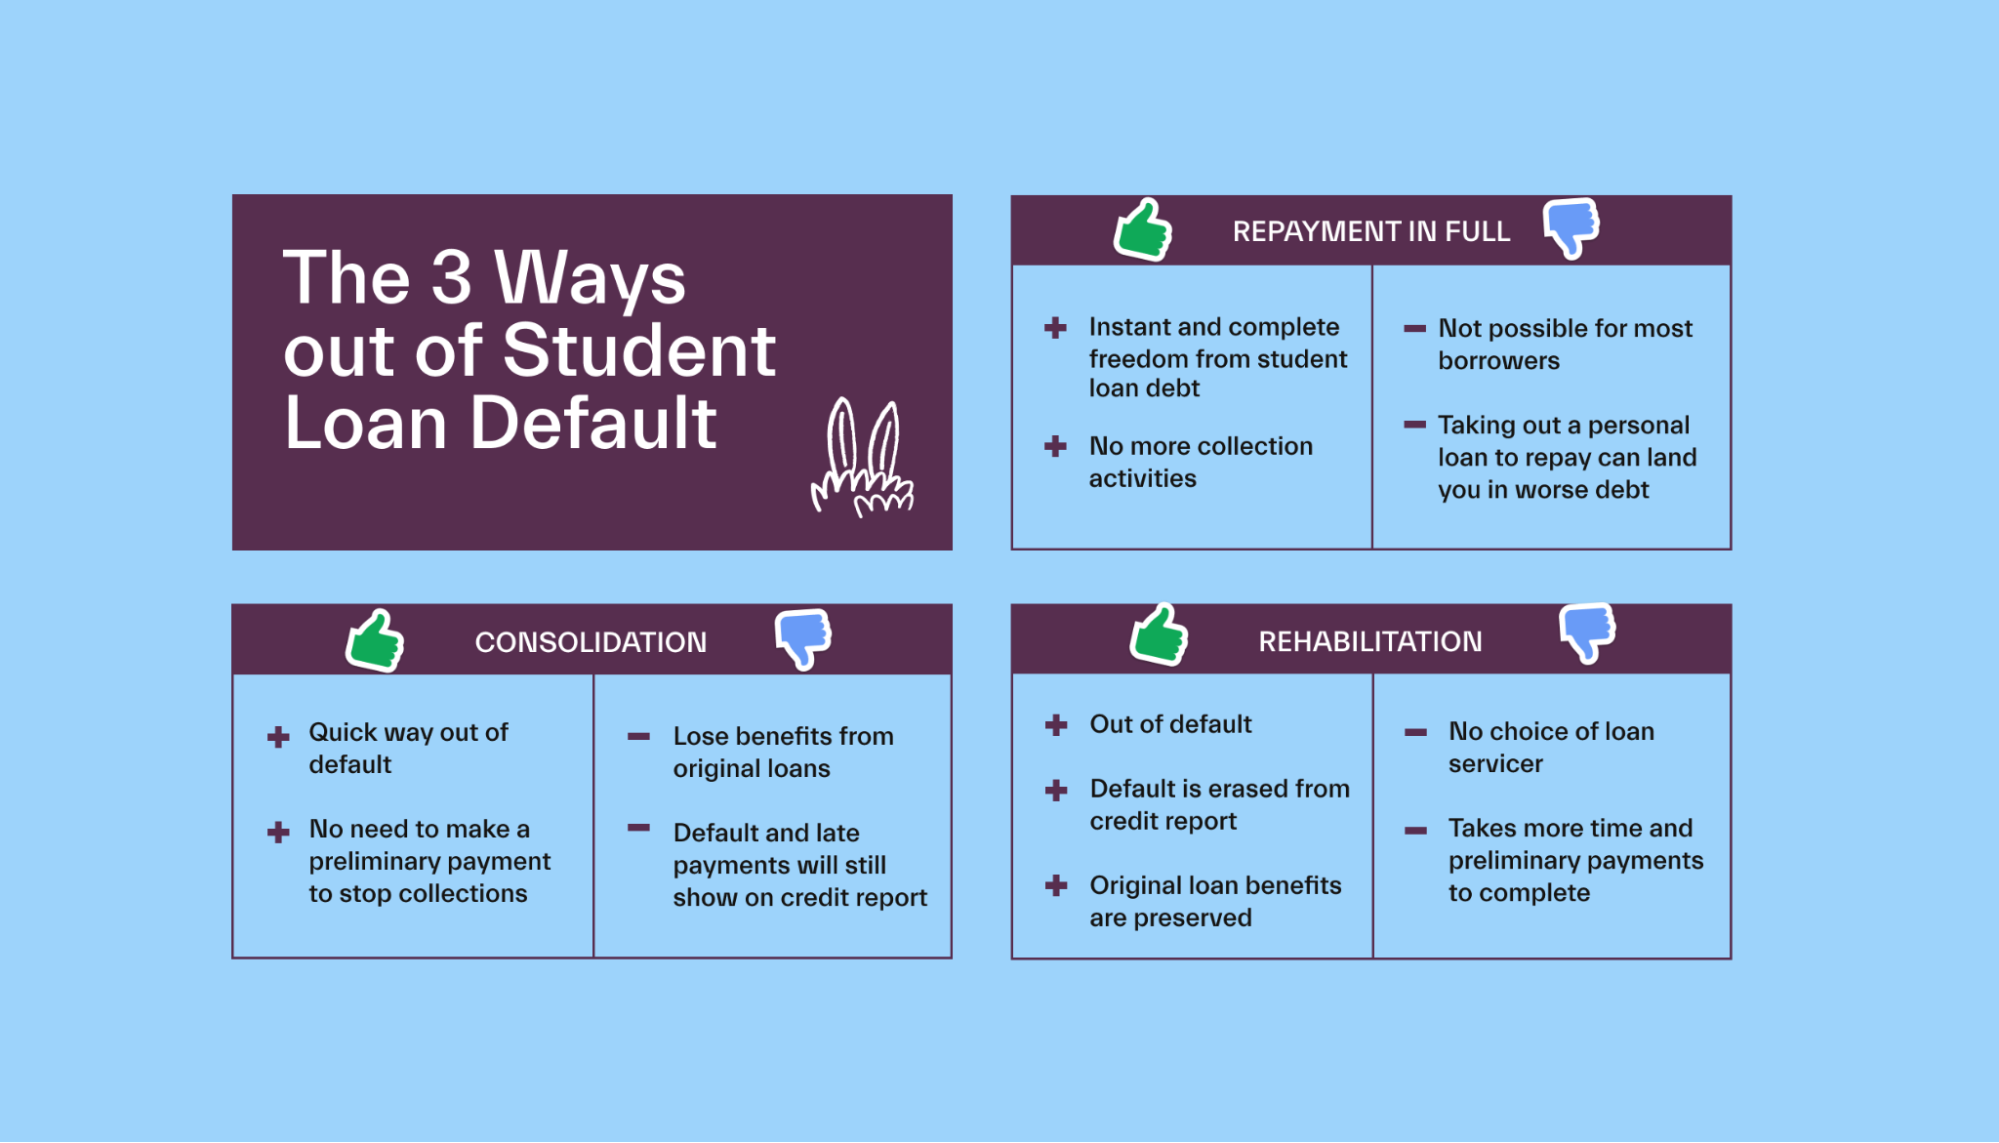 How To Get Out of Student Loan Default